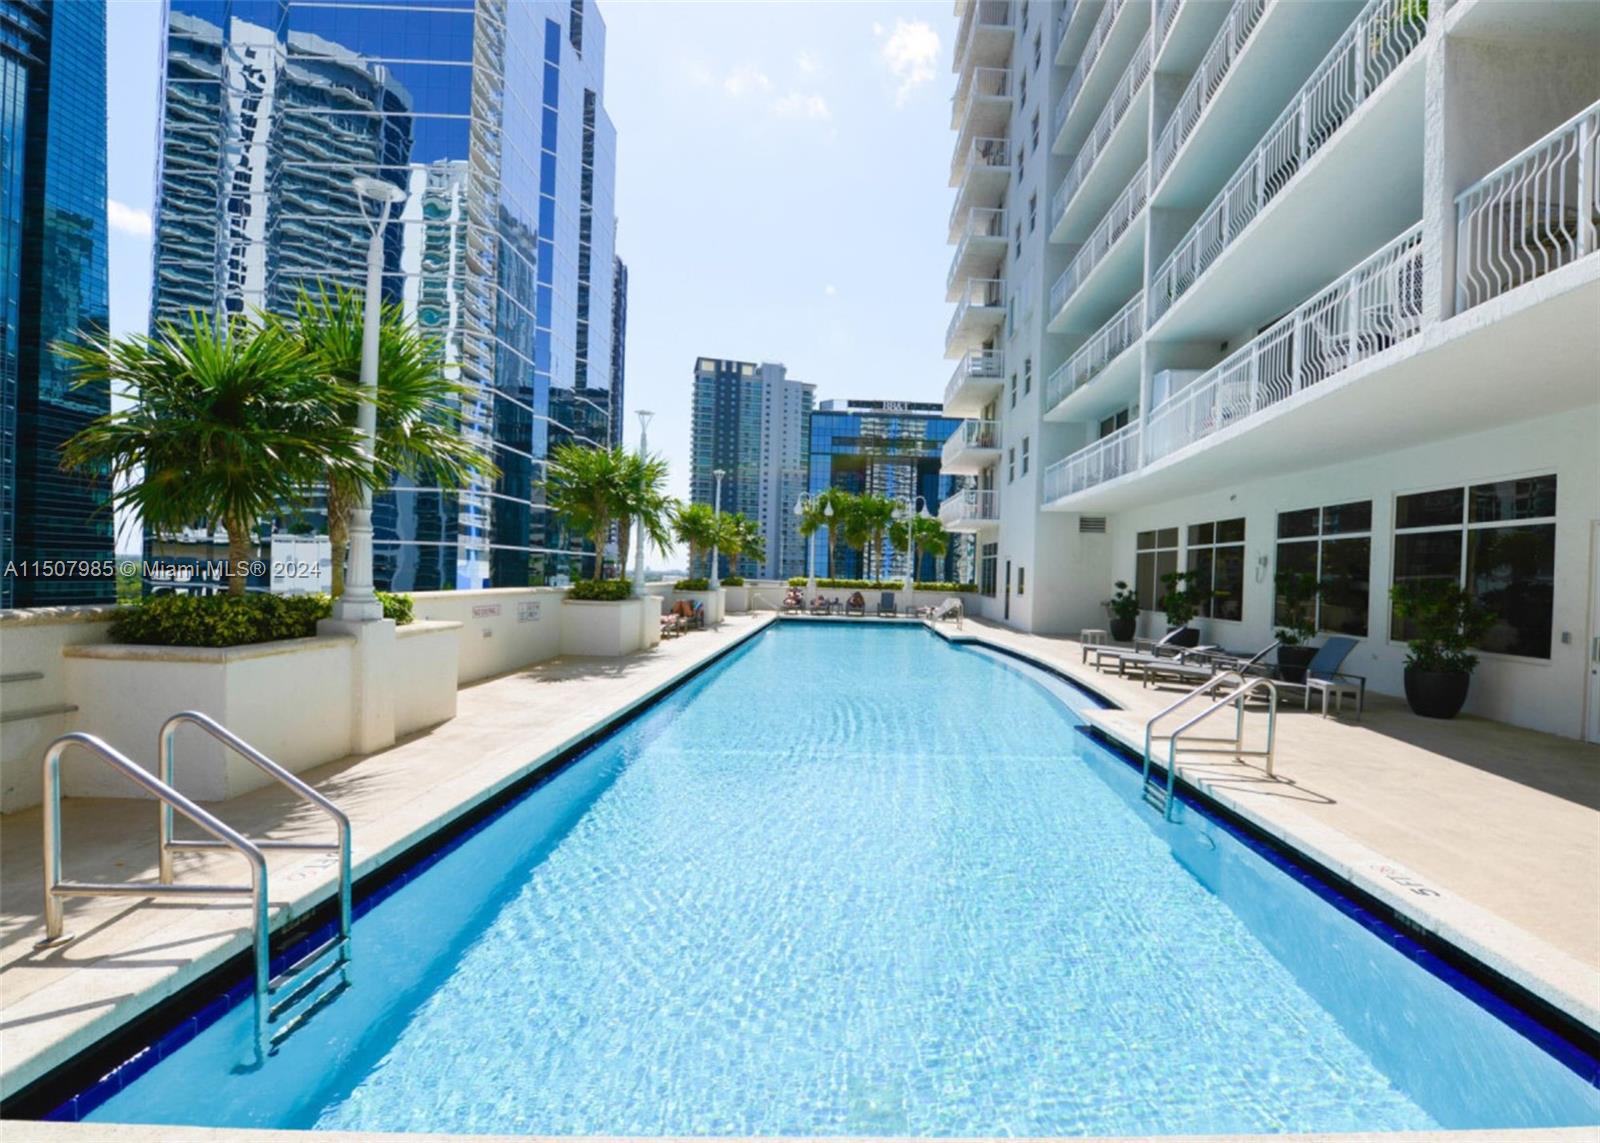 a view of swimming pool with outdoor seating and a buildings view